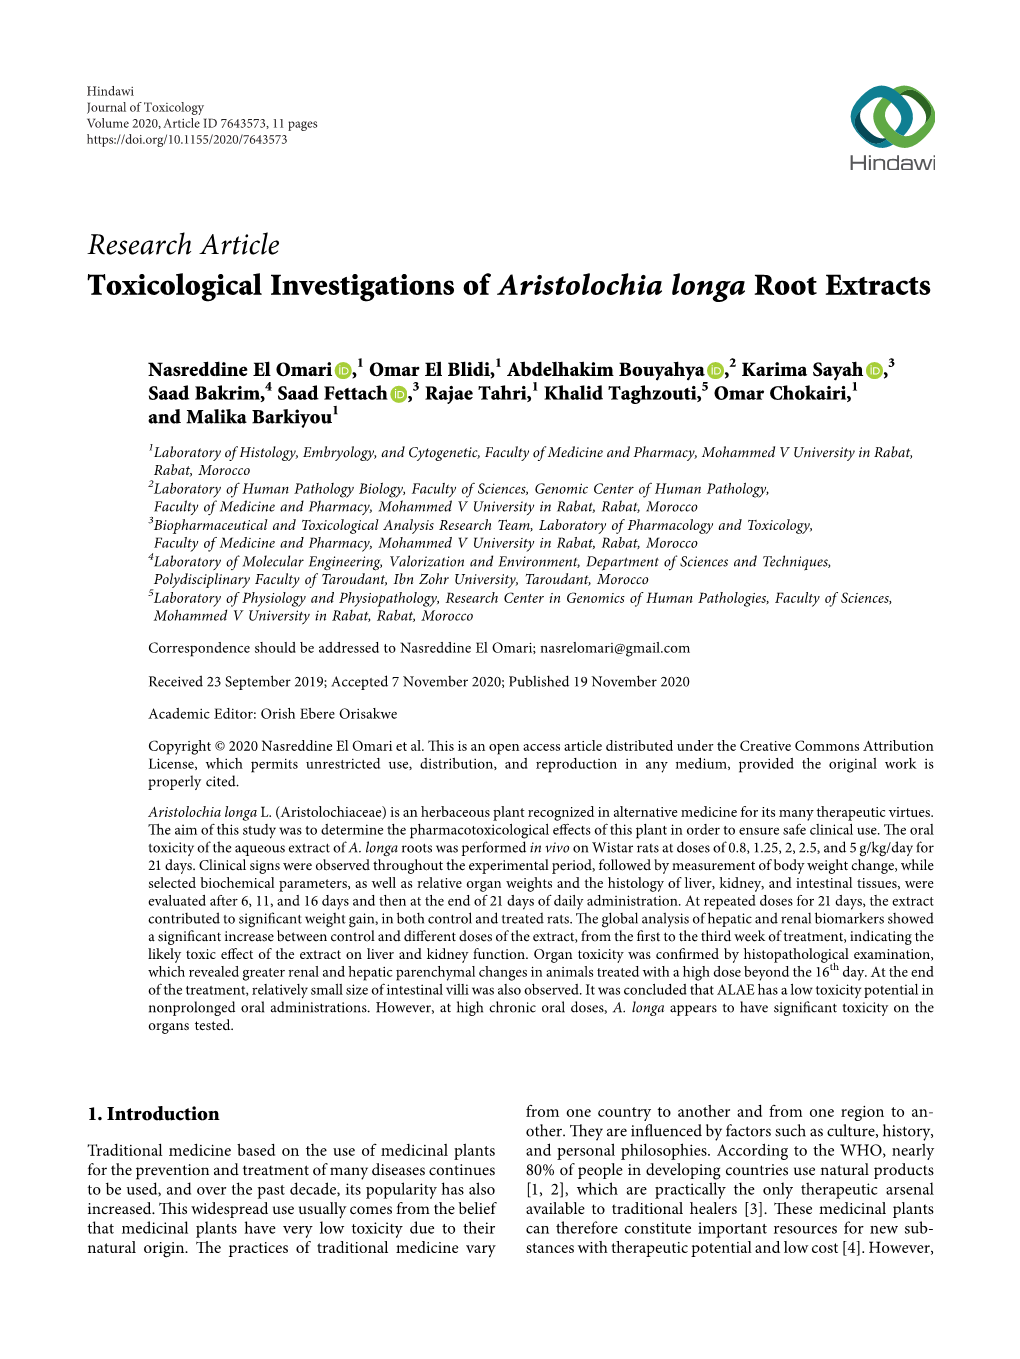 Toxicological Investigations of Aristolochia Longa Root Extracts